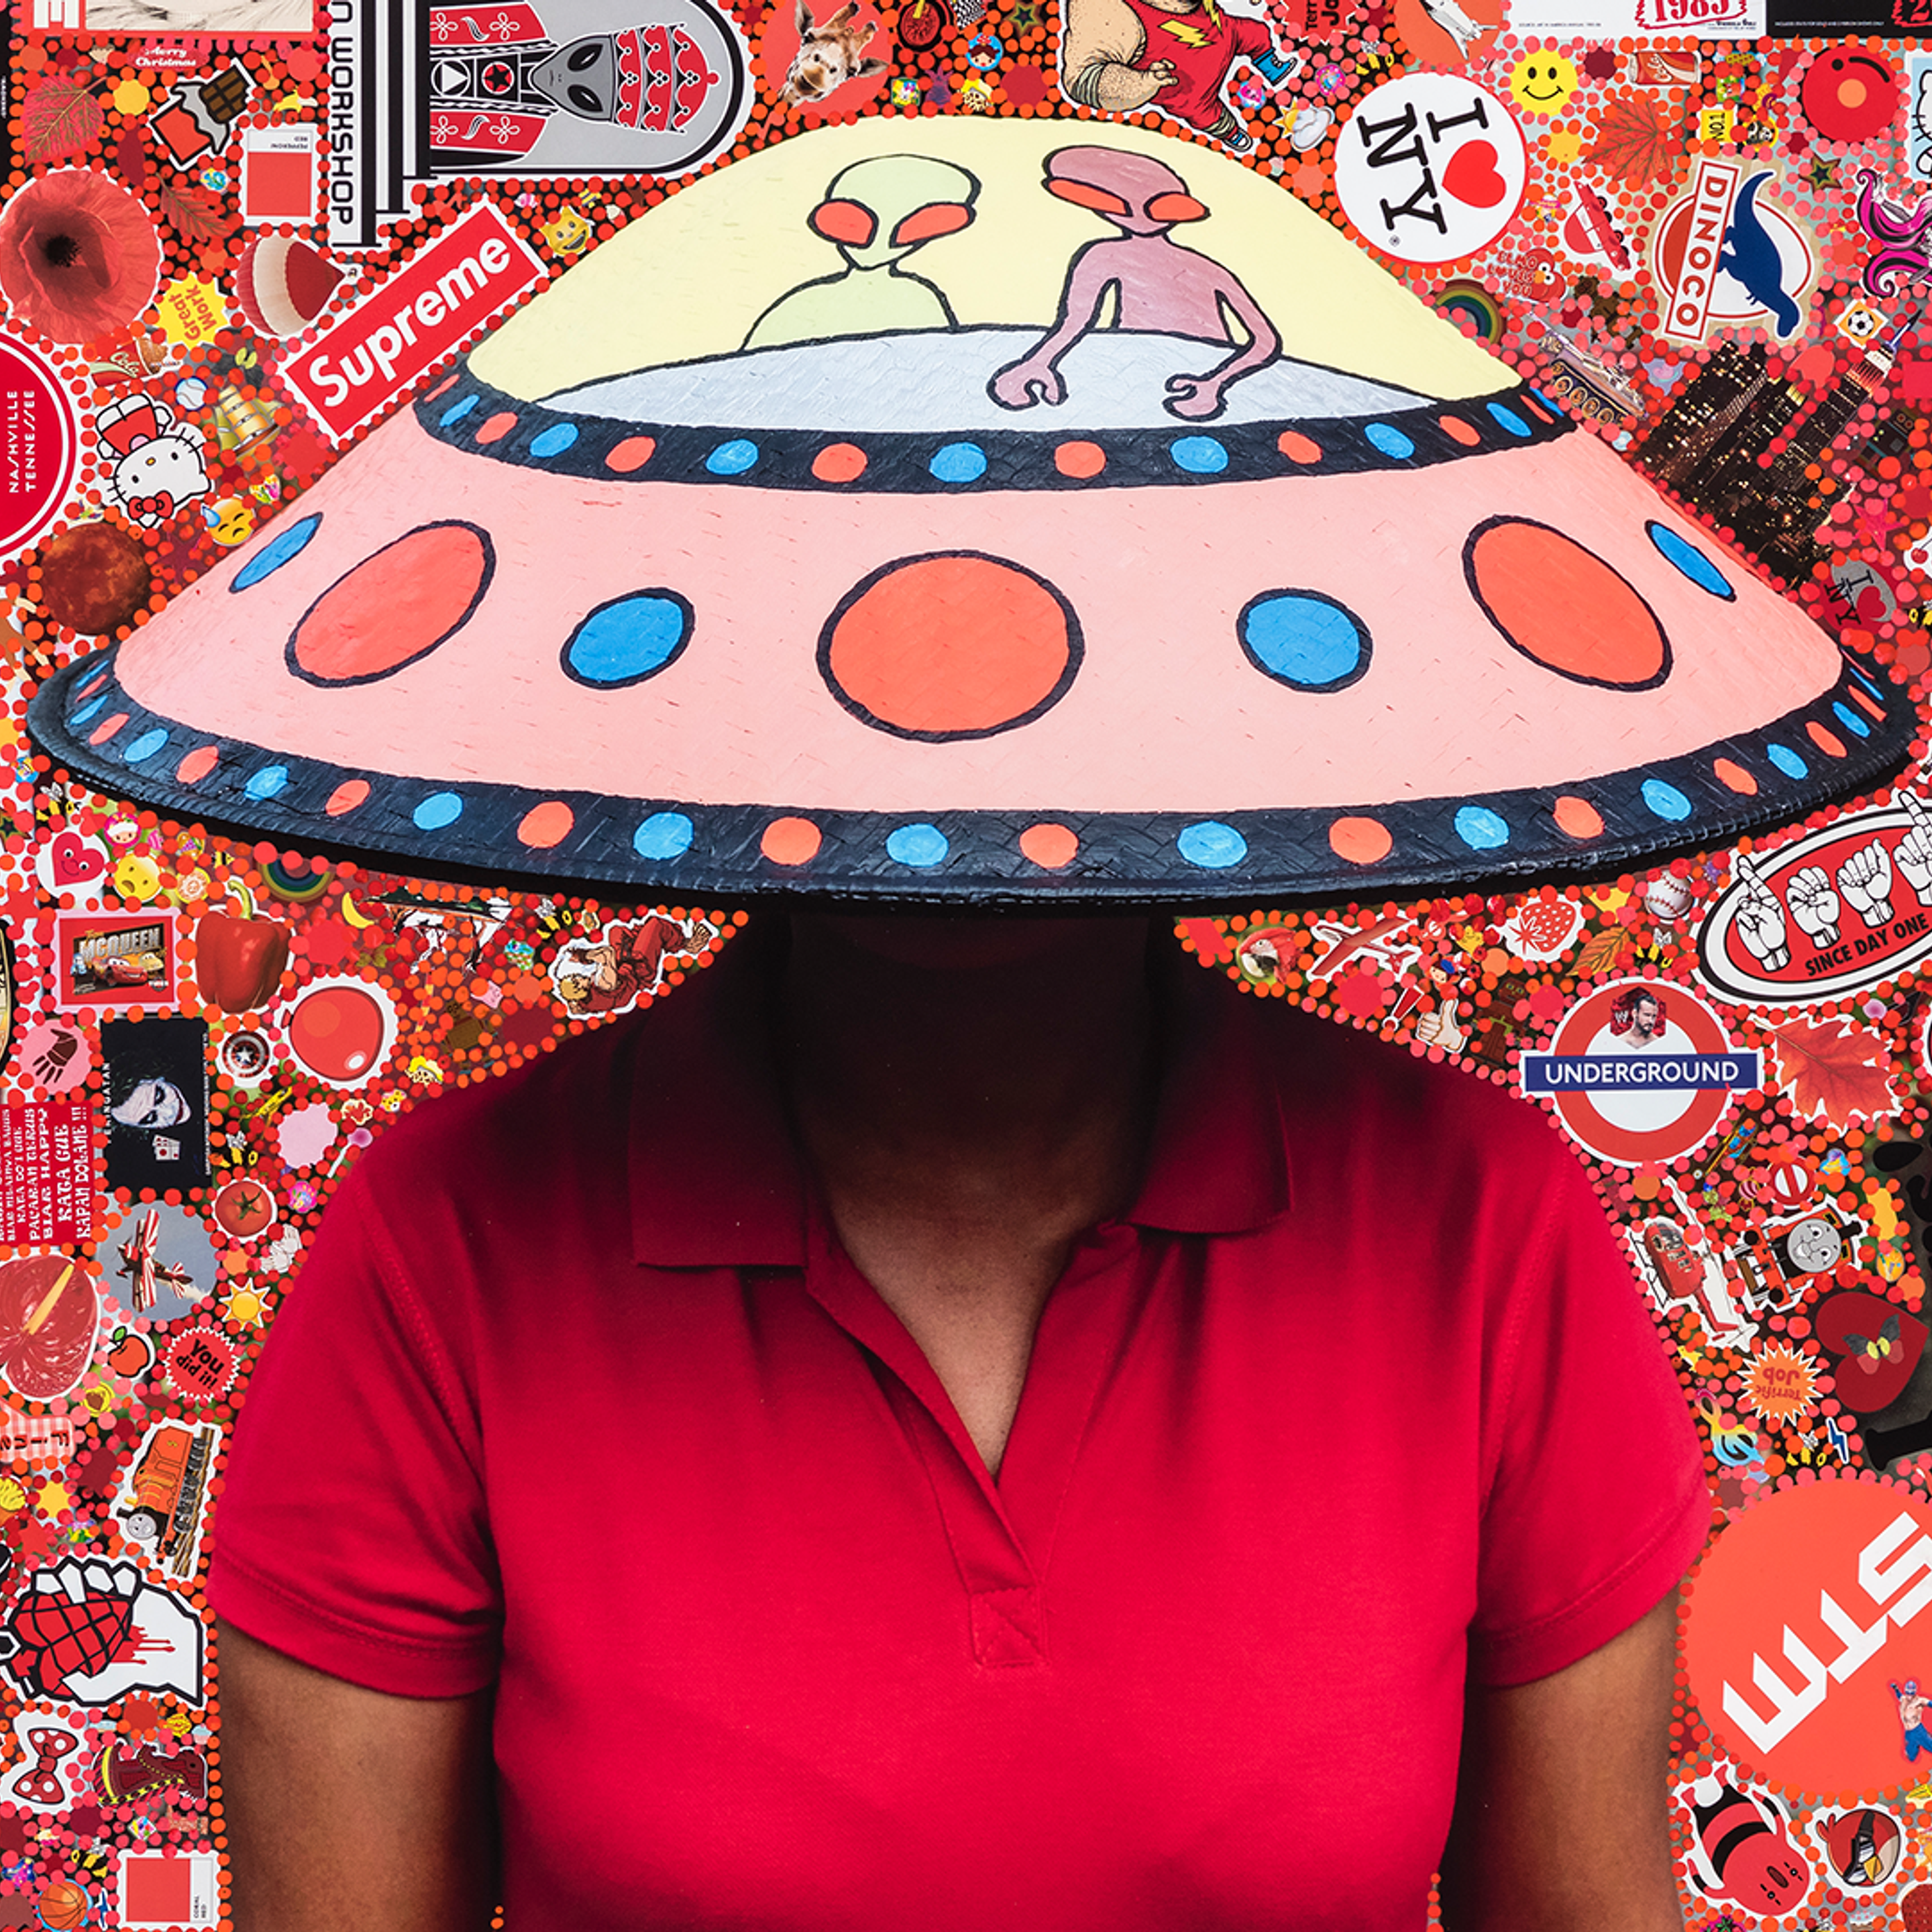 A person wears a conical hat painted like a UFO with aliens. The background is a mish mash of similarly coloured pop culture references.